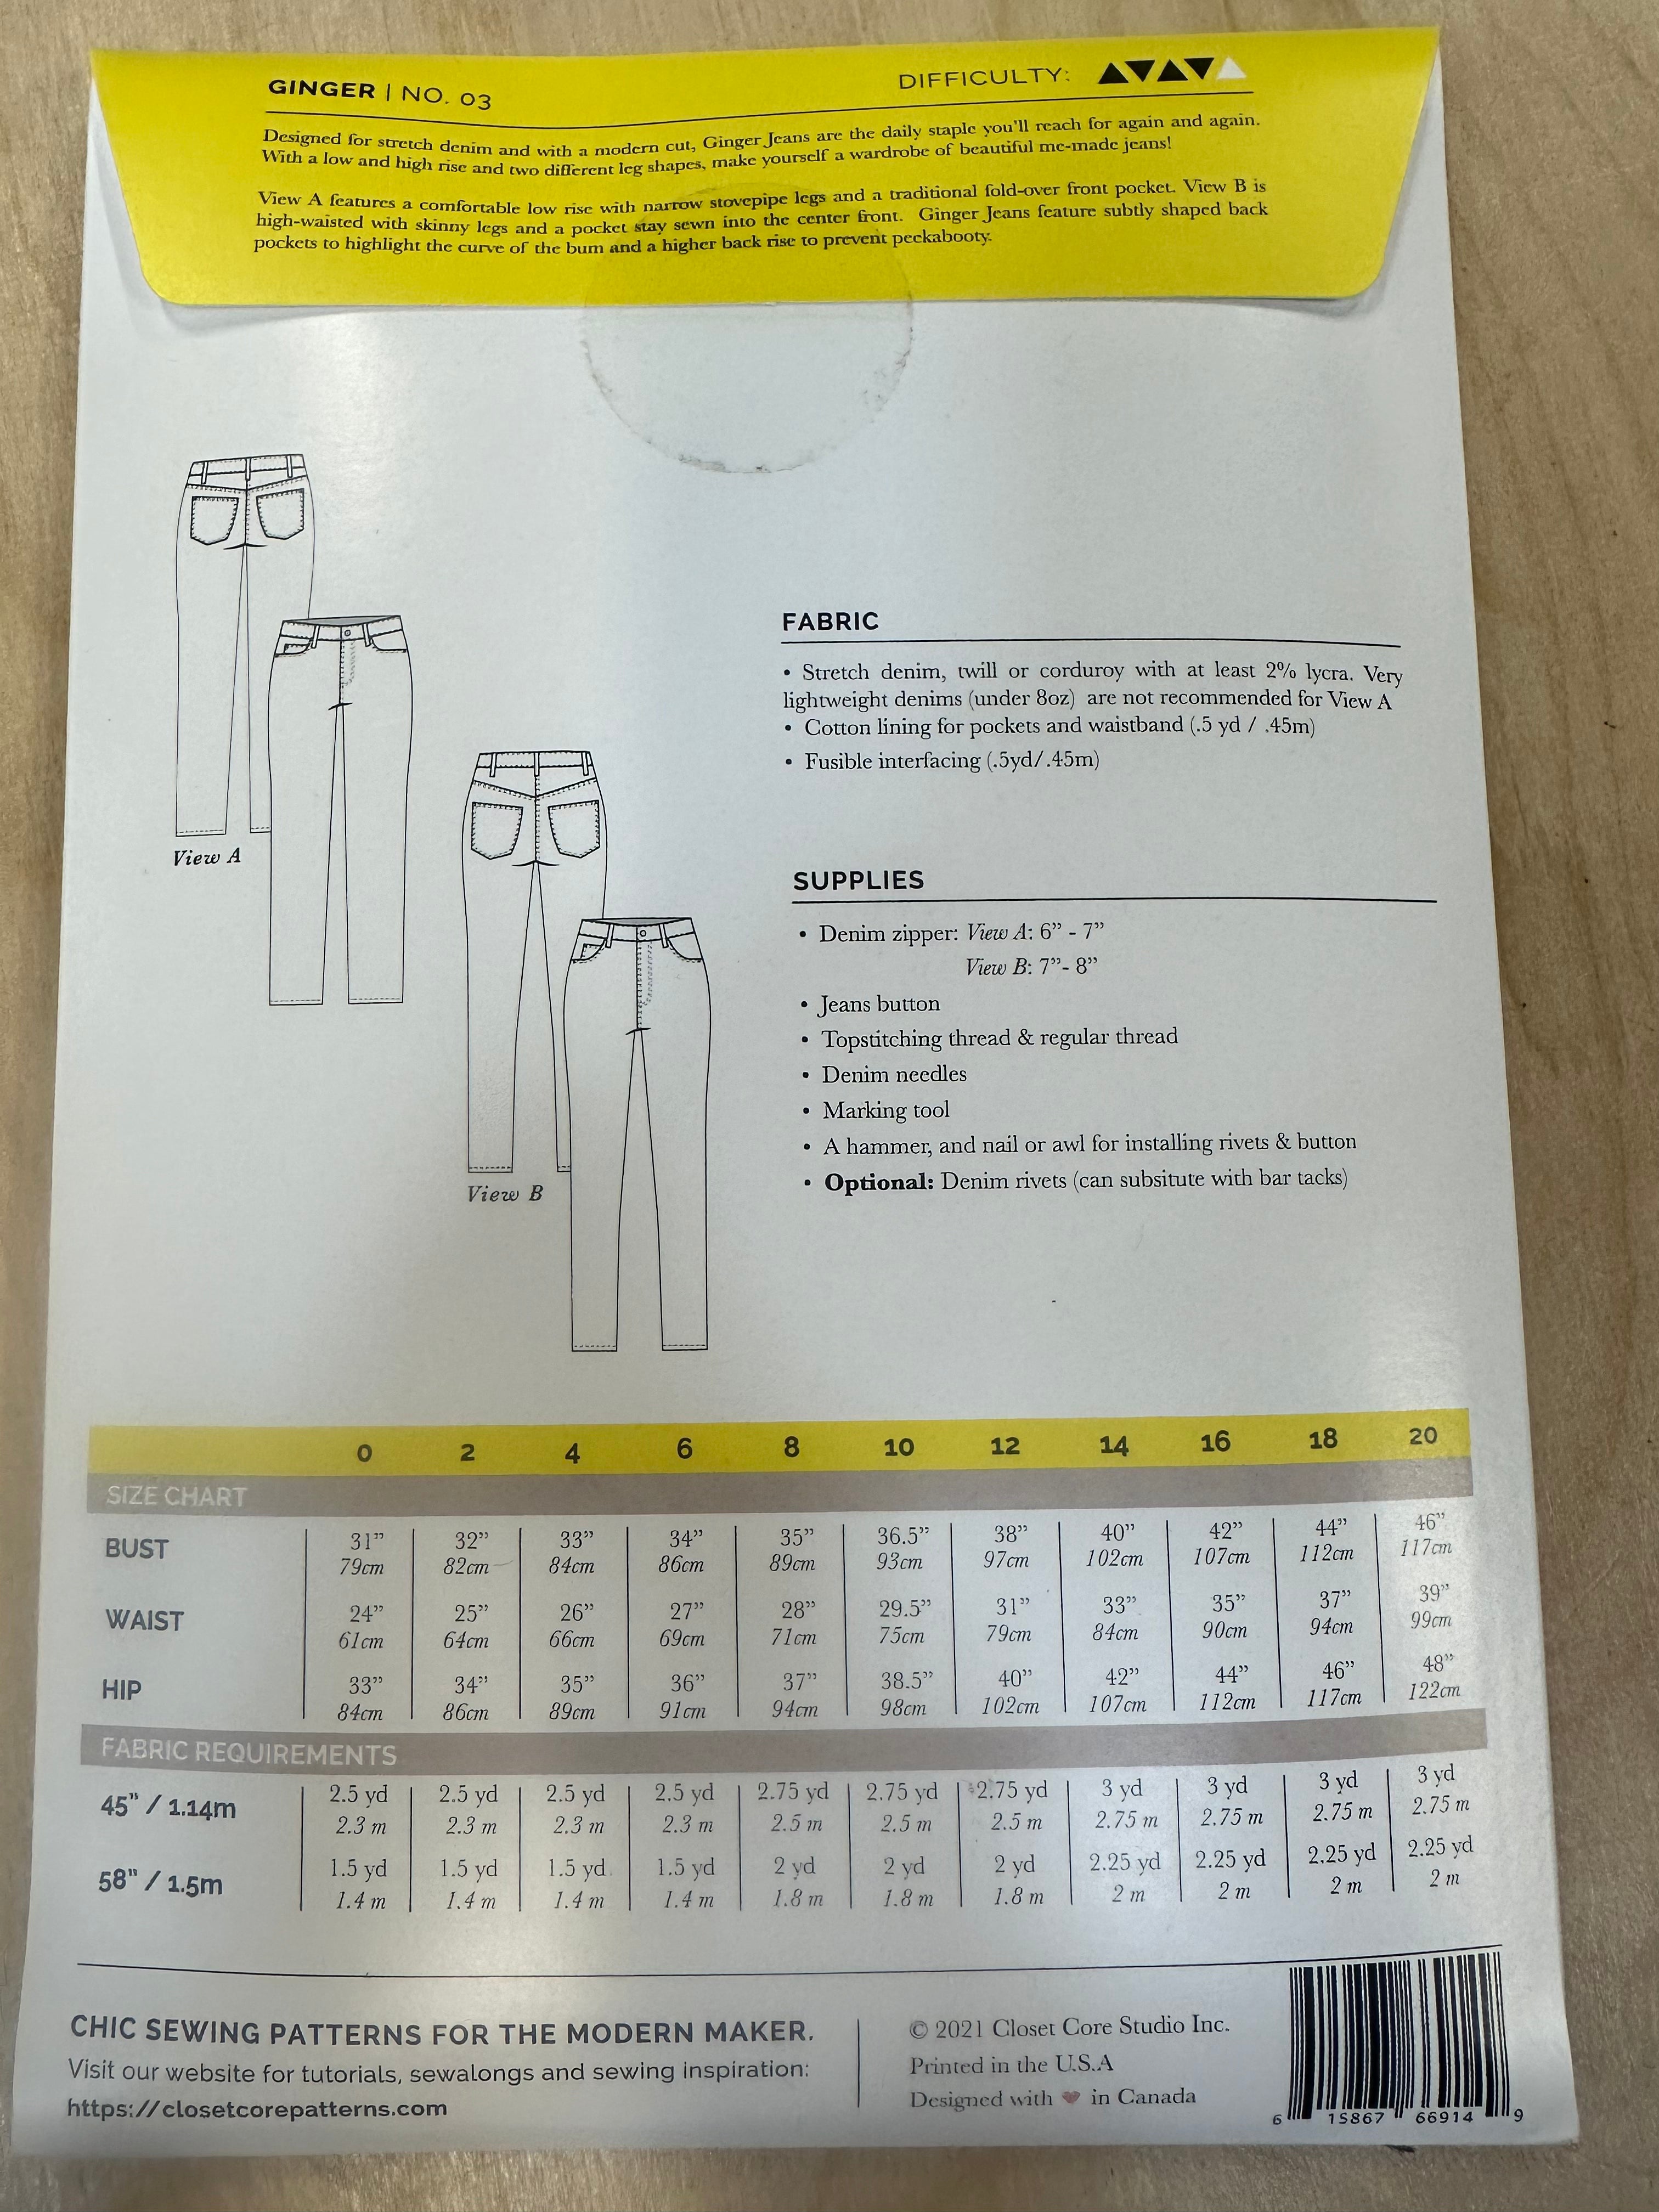 Closet Core Ginger Skinny Jeans Sewing Pattern